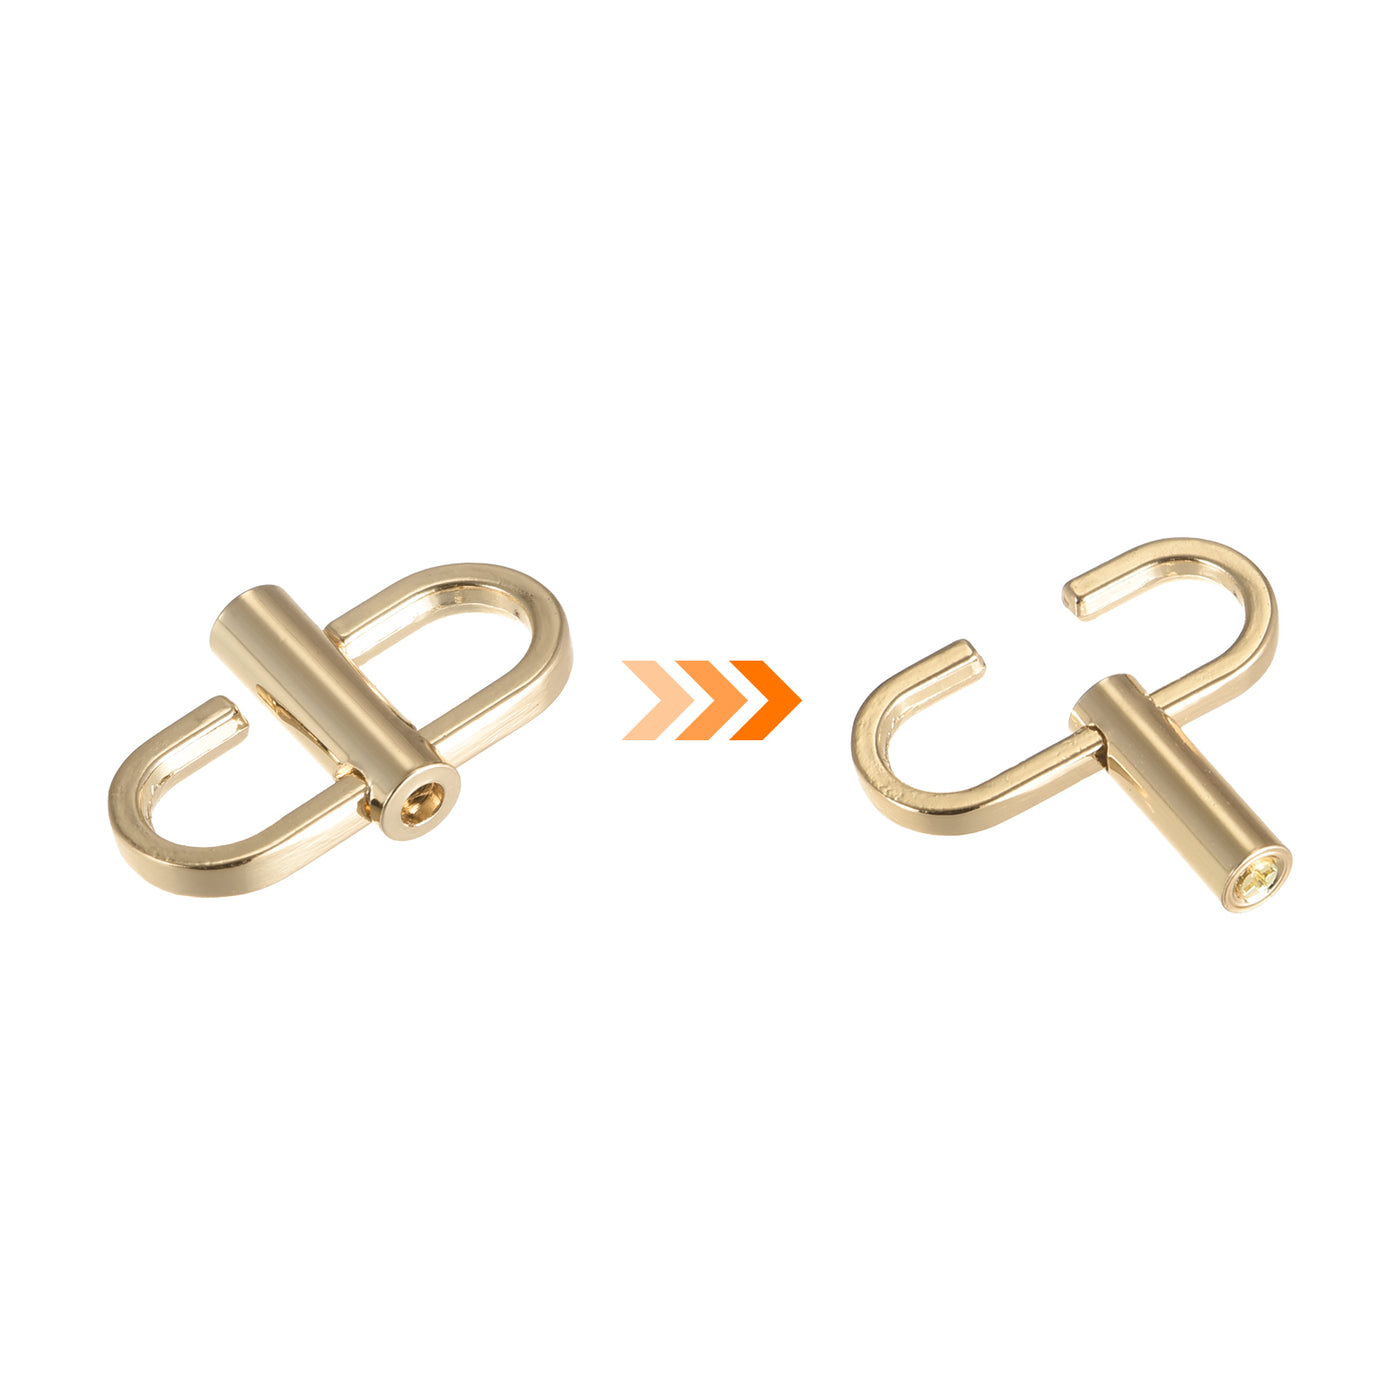 Uxcell Uxcell Adjustable Metal Buckles for Chain Strap, 2Pcs 22x10mm Chain Shortener, Gold